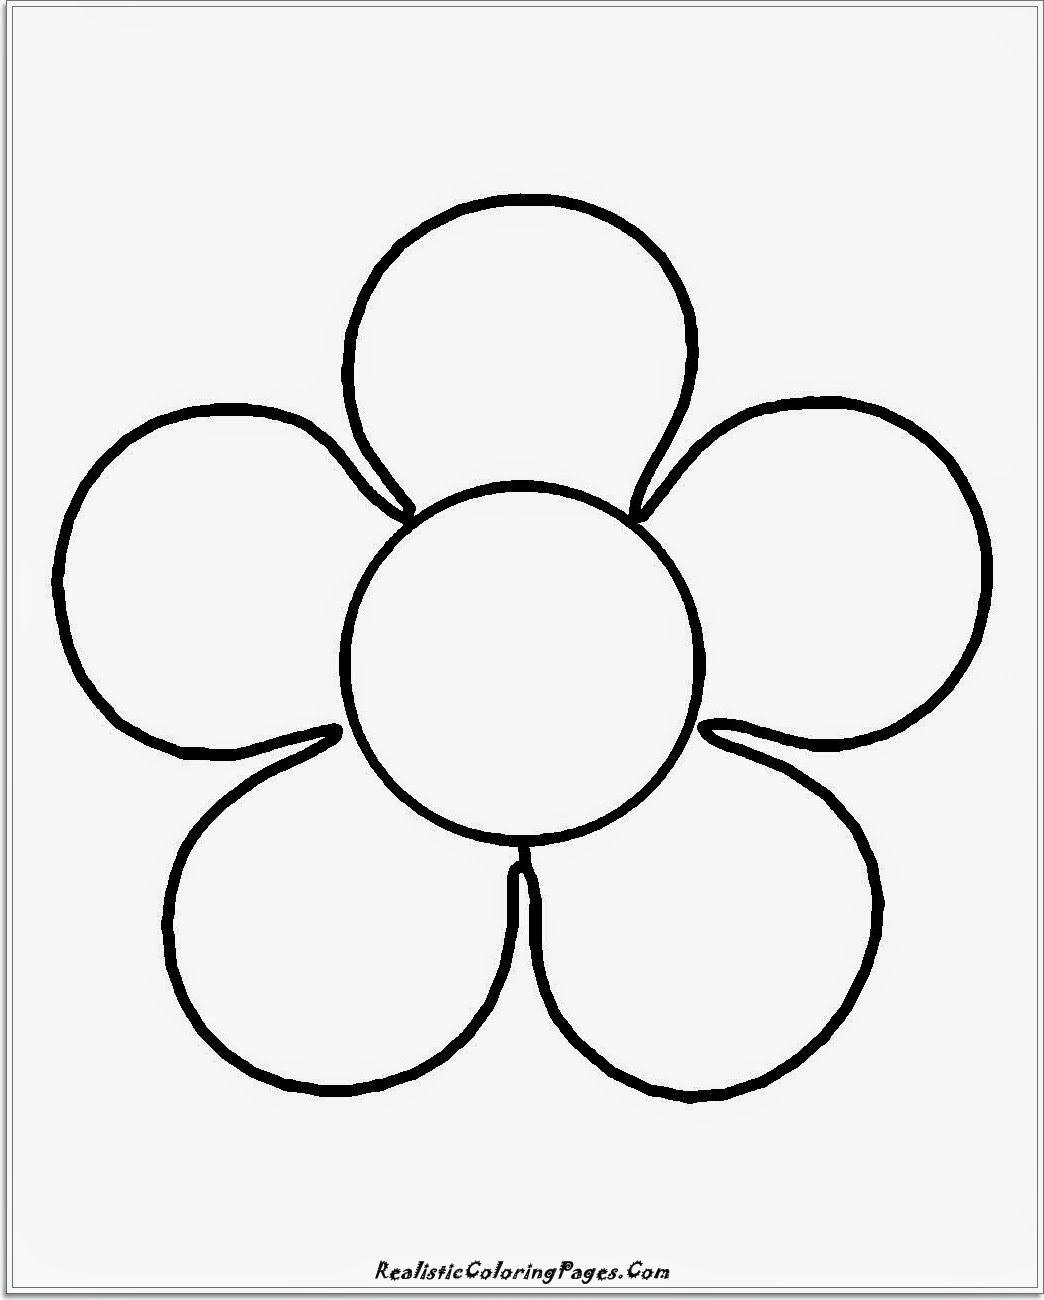 Coloring Pages Simple Flower - High Quality Coloring Pages